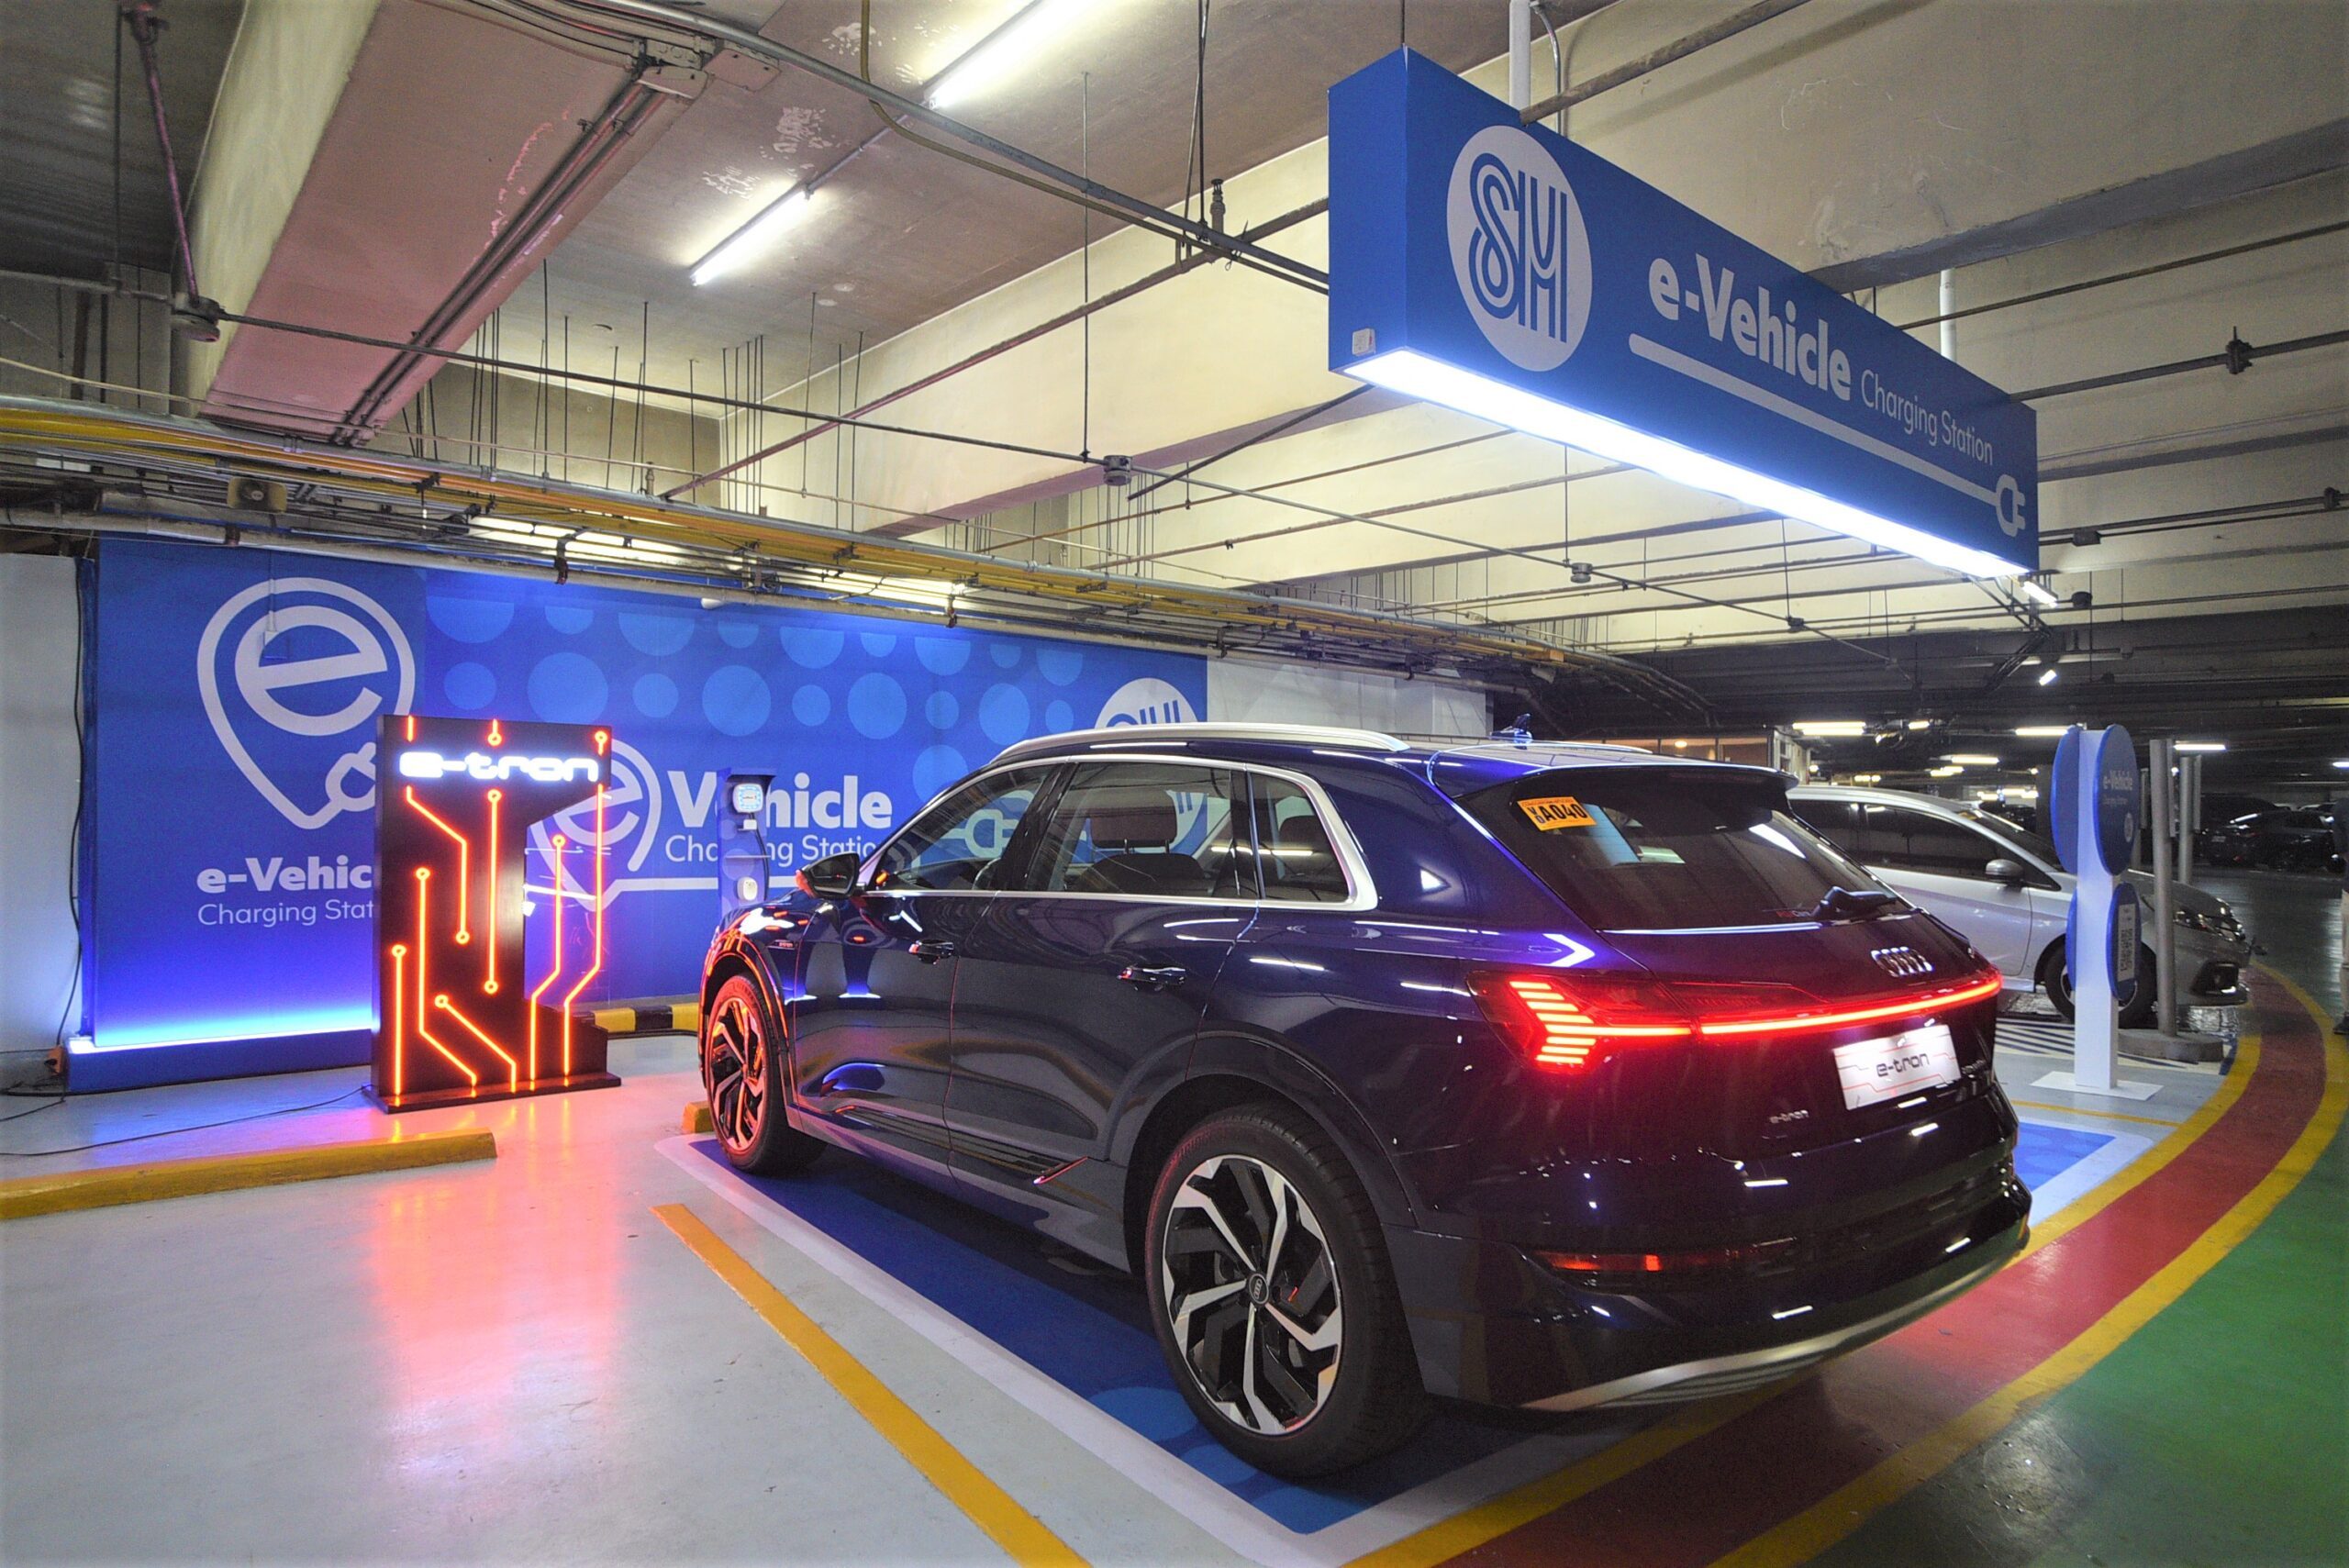 SM Supermalls installs eVehicle charging stations in select Metro